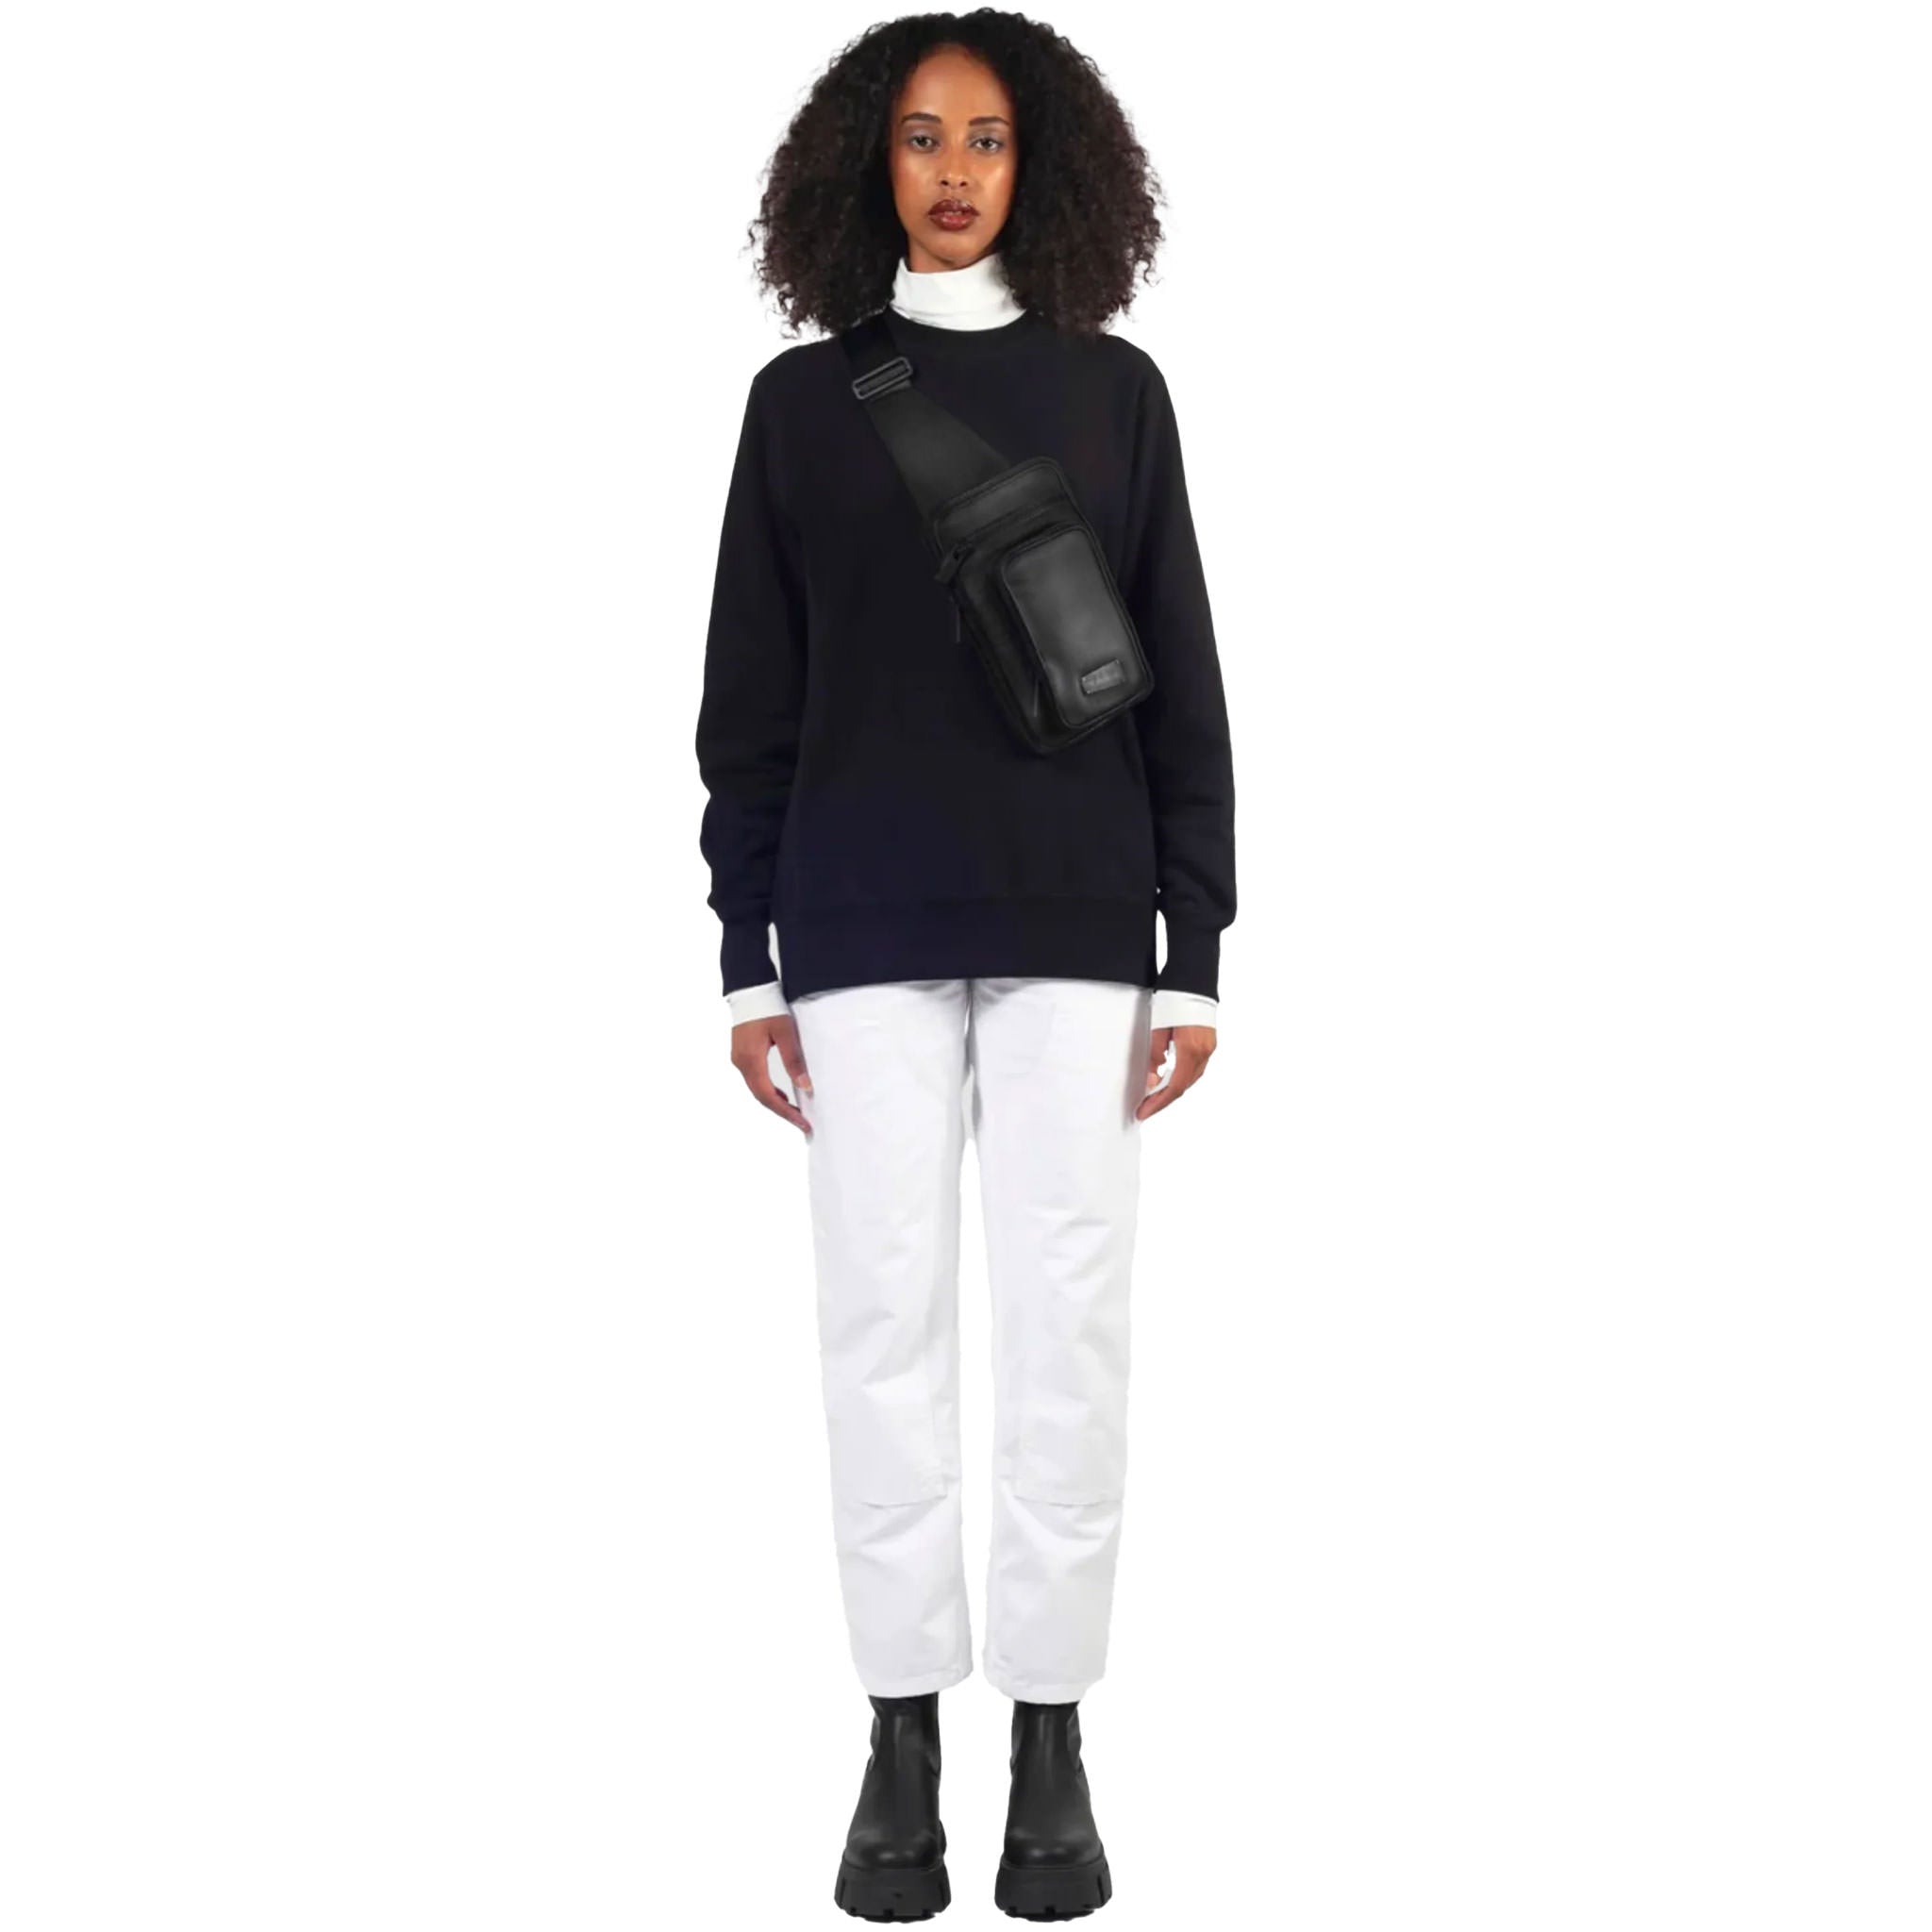 Female model stands, wearing the sling sling in black upcycled leather with a sleek finish as a crossbody on a white background.